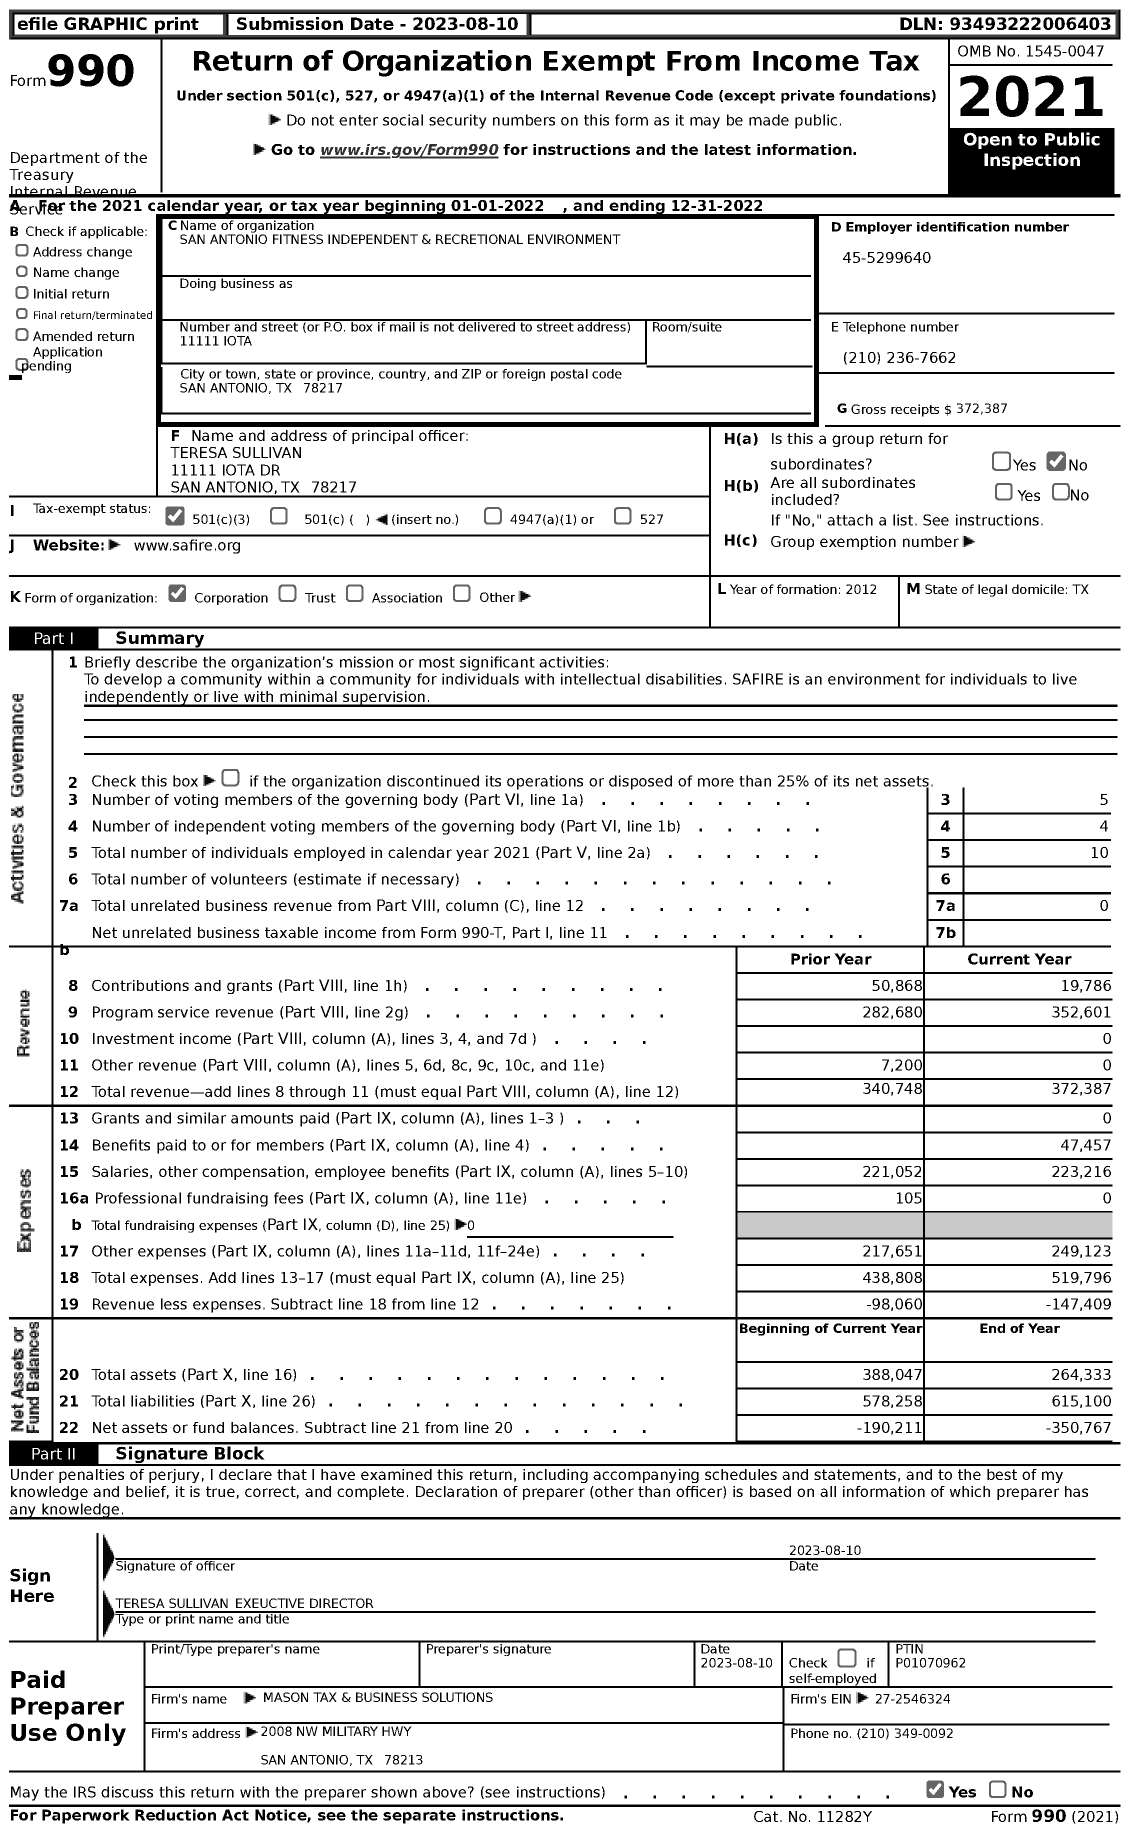 Image of first page of 2022 Form 990 for San Antonio Fitness Independent and Recretional Environment